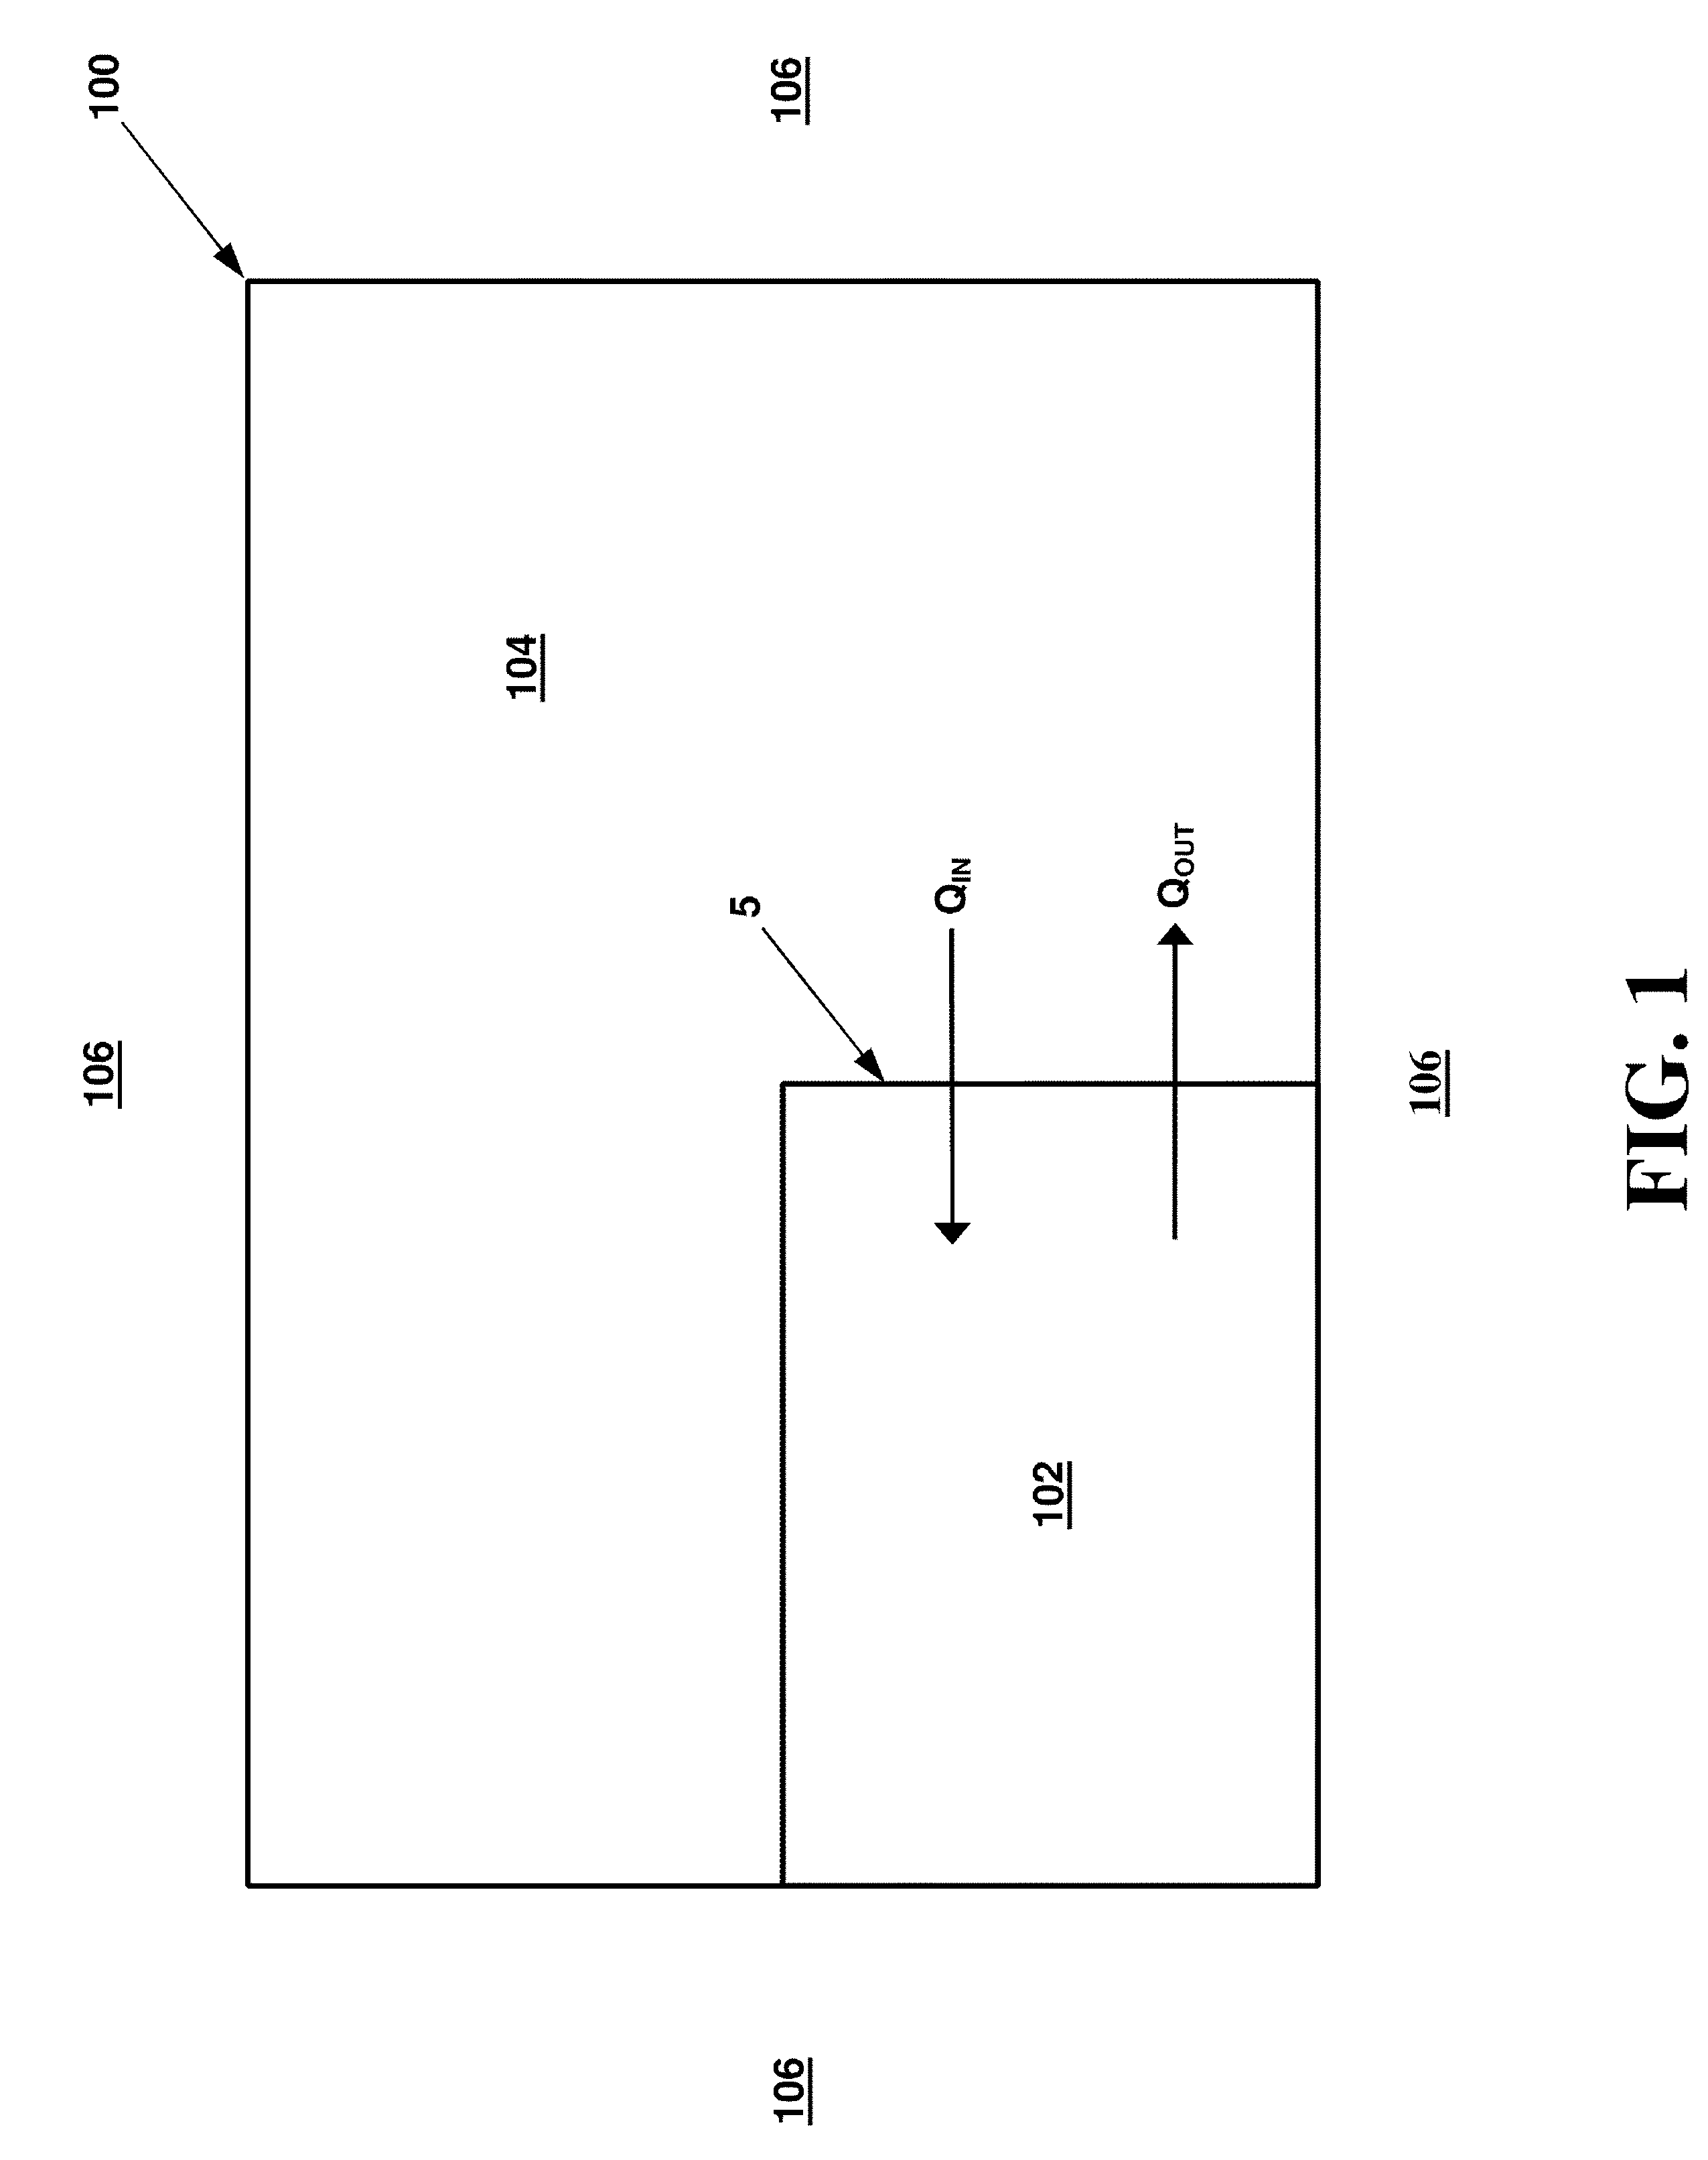 Air sampling system having a plurality of air sampling devices with their own flow switches